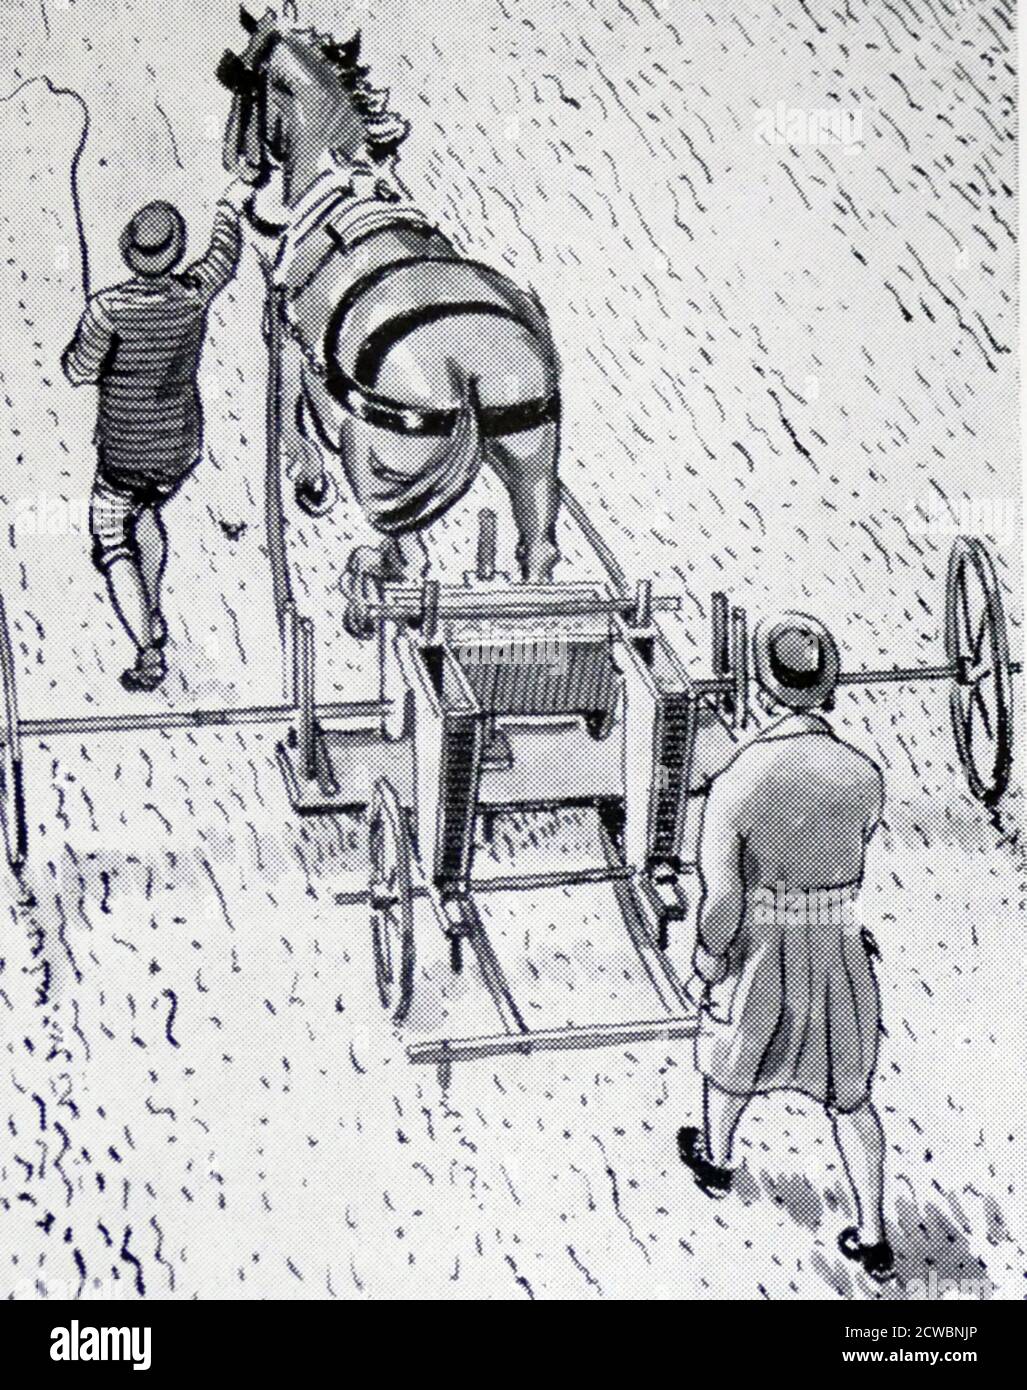 Illustration showing the seed drill developed by Jethro Tull (agriculturist) (1674-1741), Stock Photo